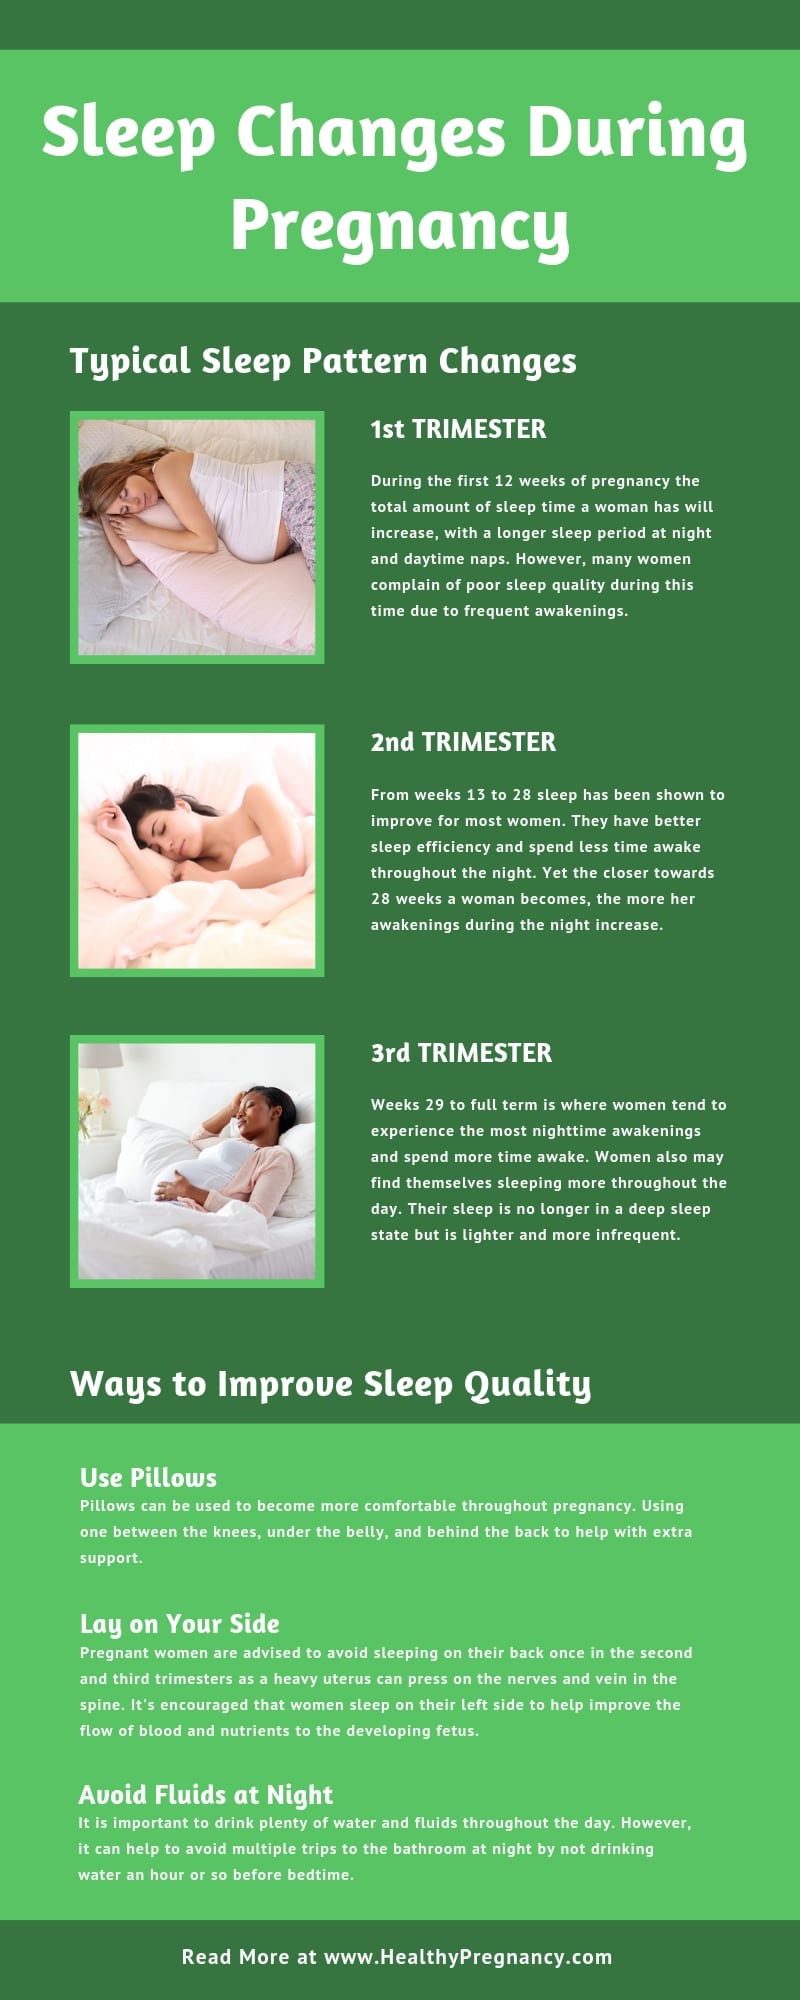 How Your Sleep Changes During Pregnancy - Healthy Pregnancy